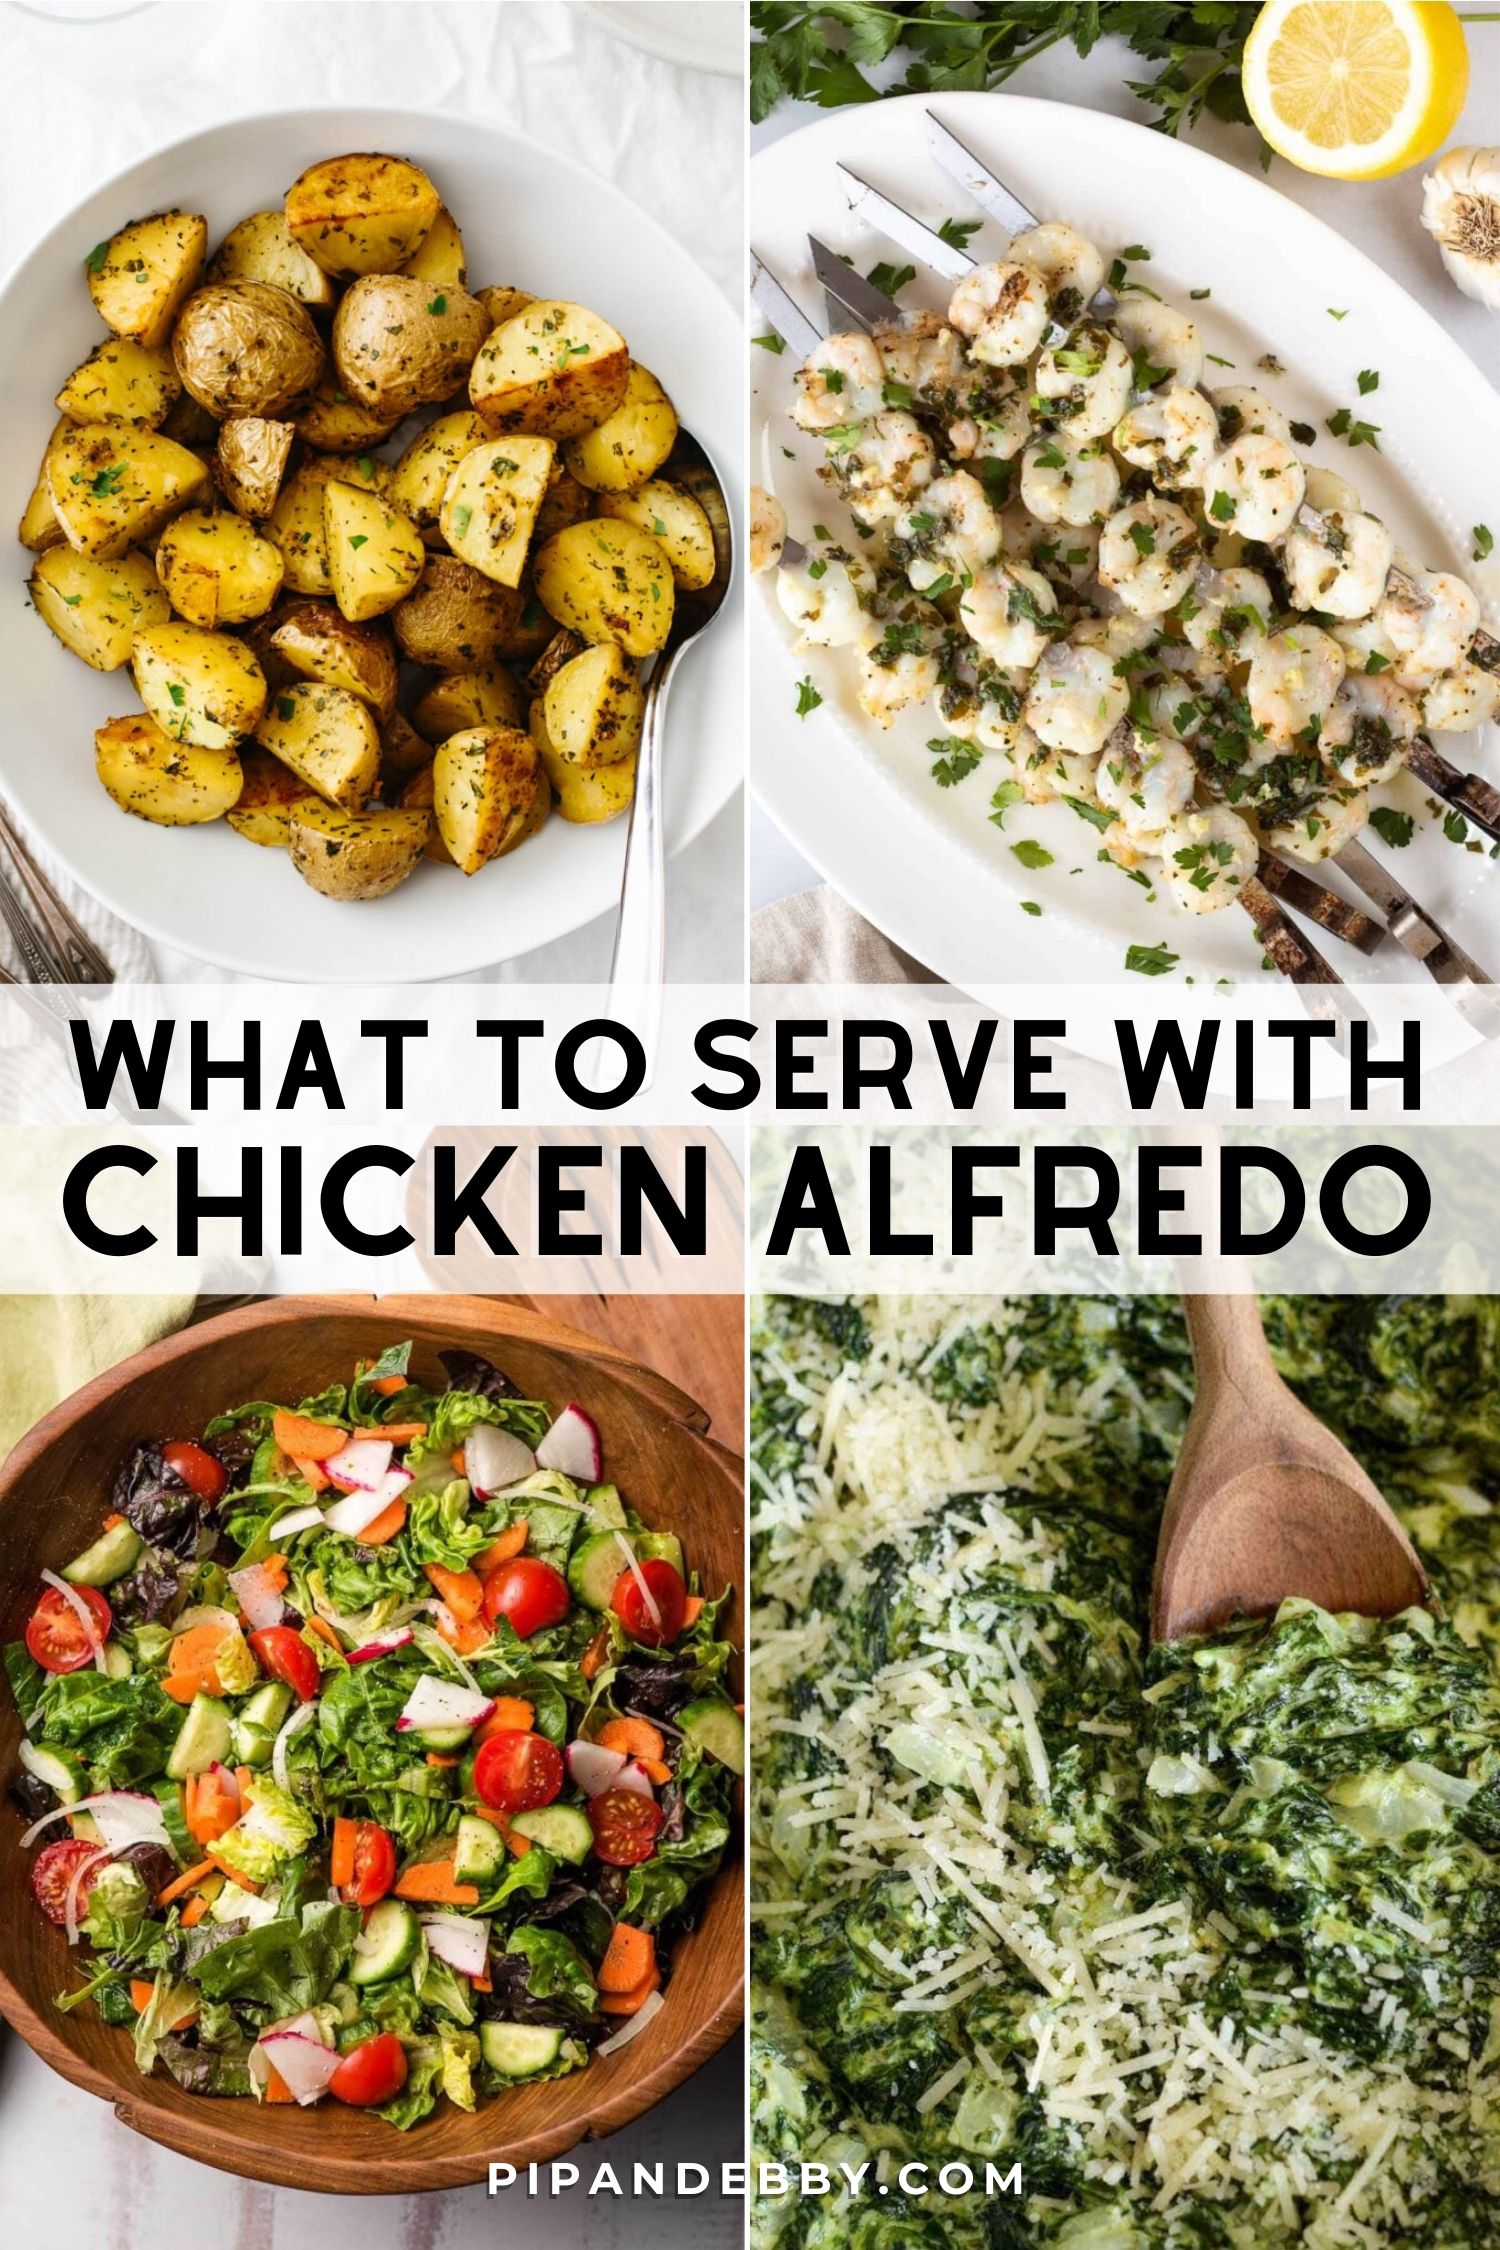 Four food photos in a grid with text overlay reading, "What to serve with chicken alfredo."